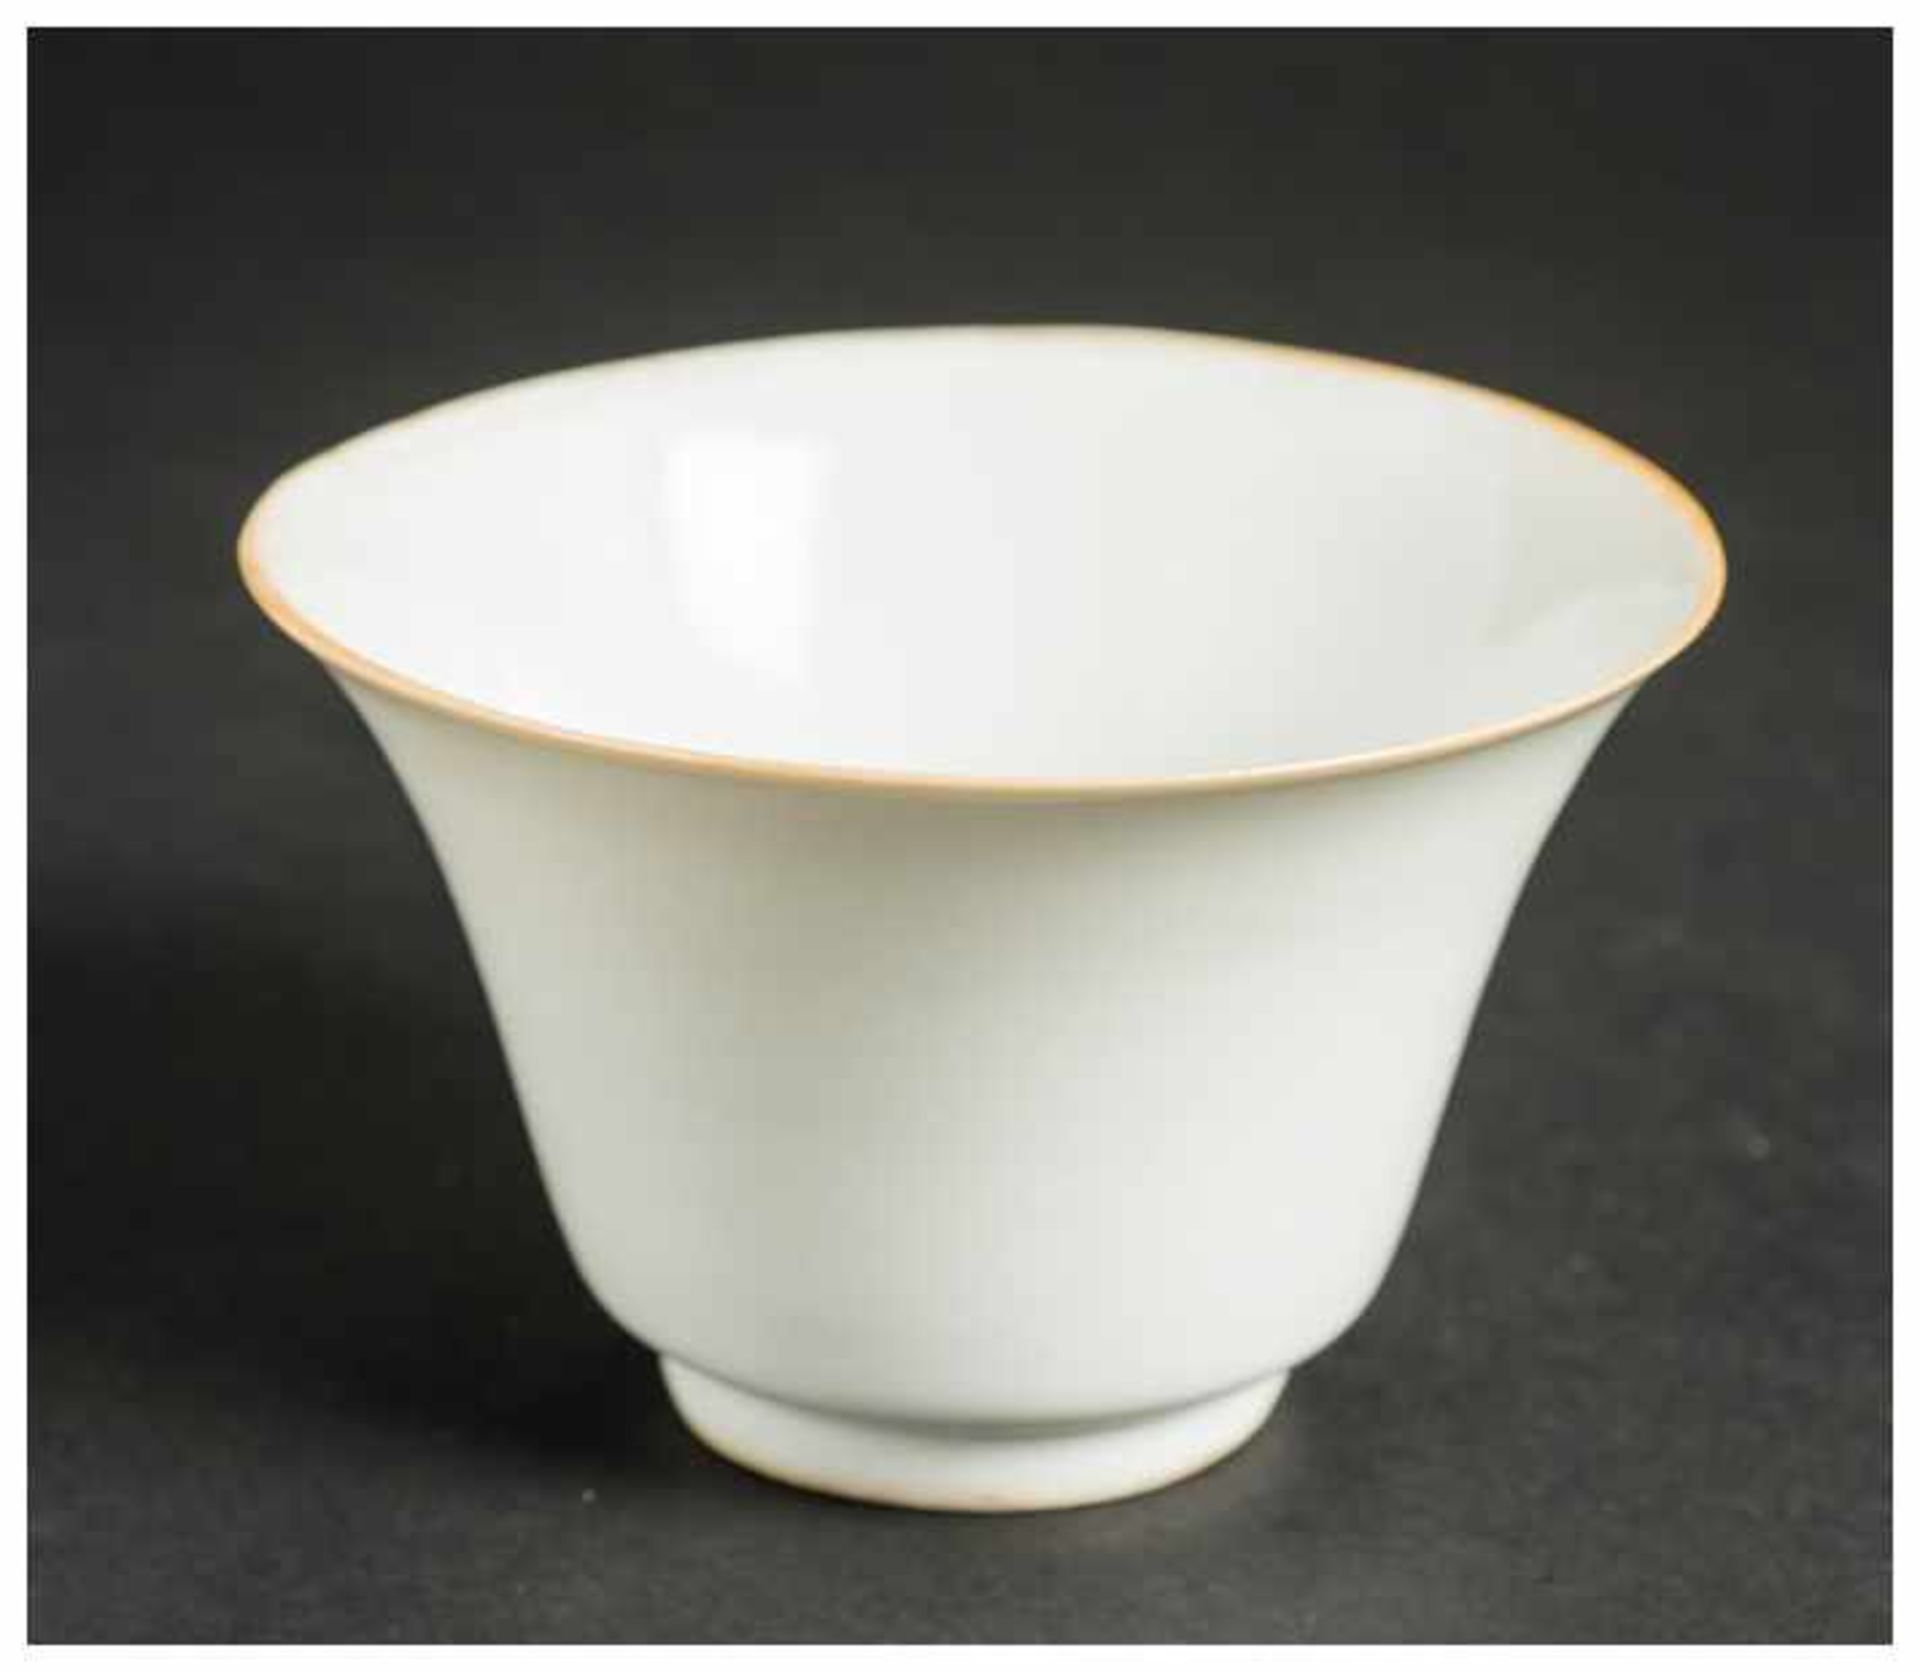 A CHINESE BLANC DE CHINE CUP Blanc-de-Chine porcelain. China, Qing dynasty, approx. 18th - 19th